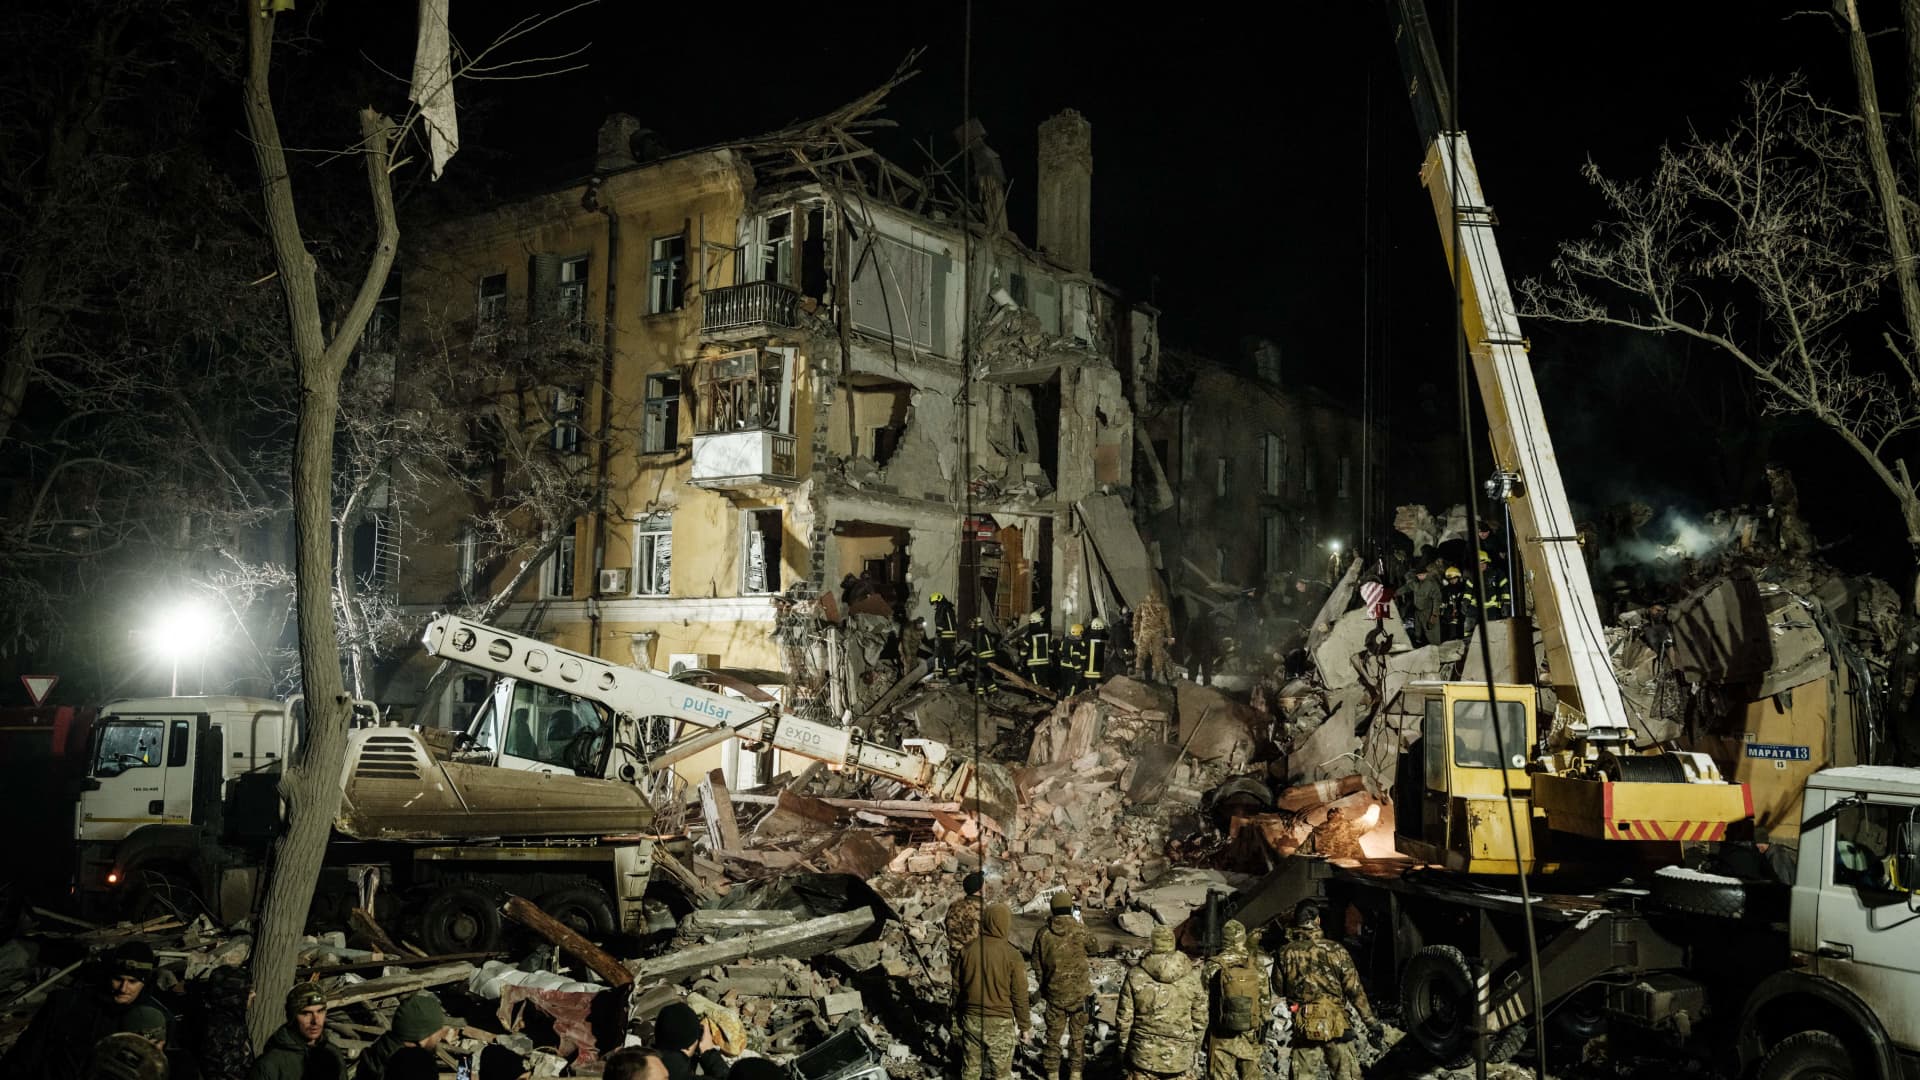 Rescuers remove debris to search for survivors at a destroyed apartment building hit by a rocket in downtown Kramatorsk on Feb. 1, 2023.